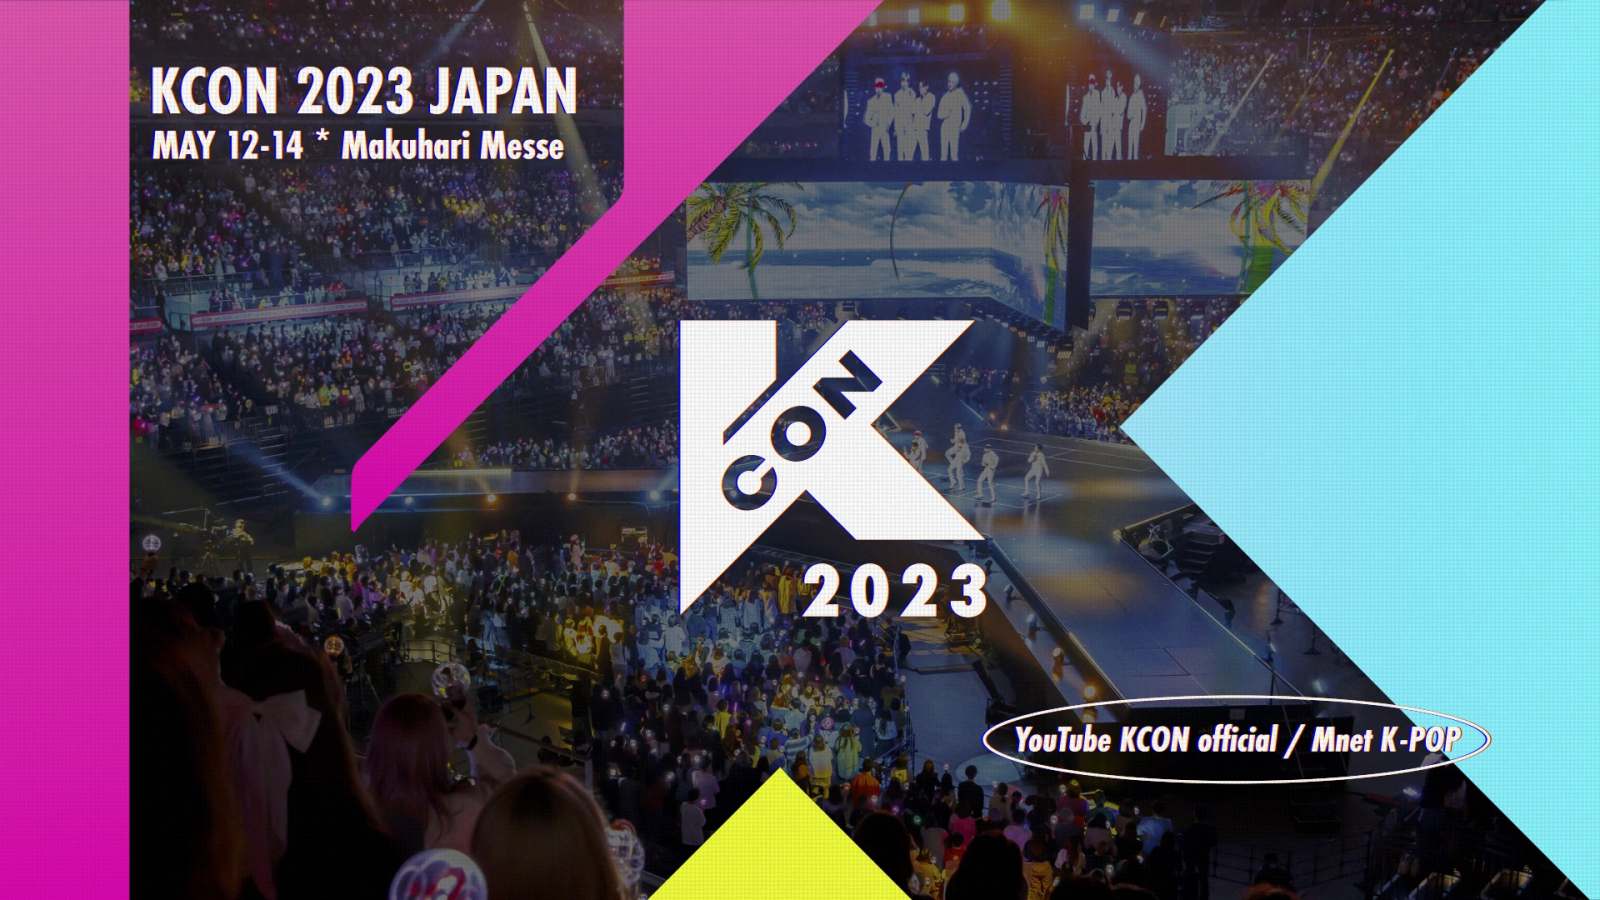 KCON 2023 Japan How to Watch, Date, Venue, Lineup, Ticket Sales, and More